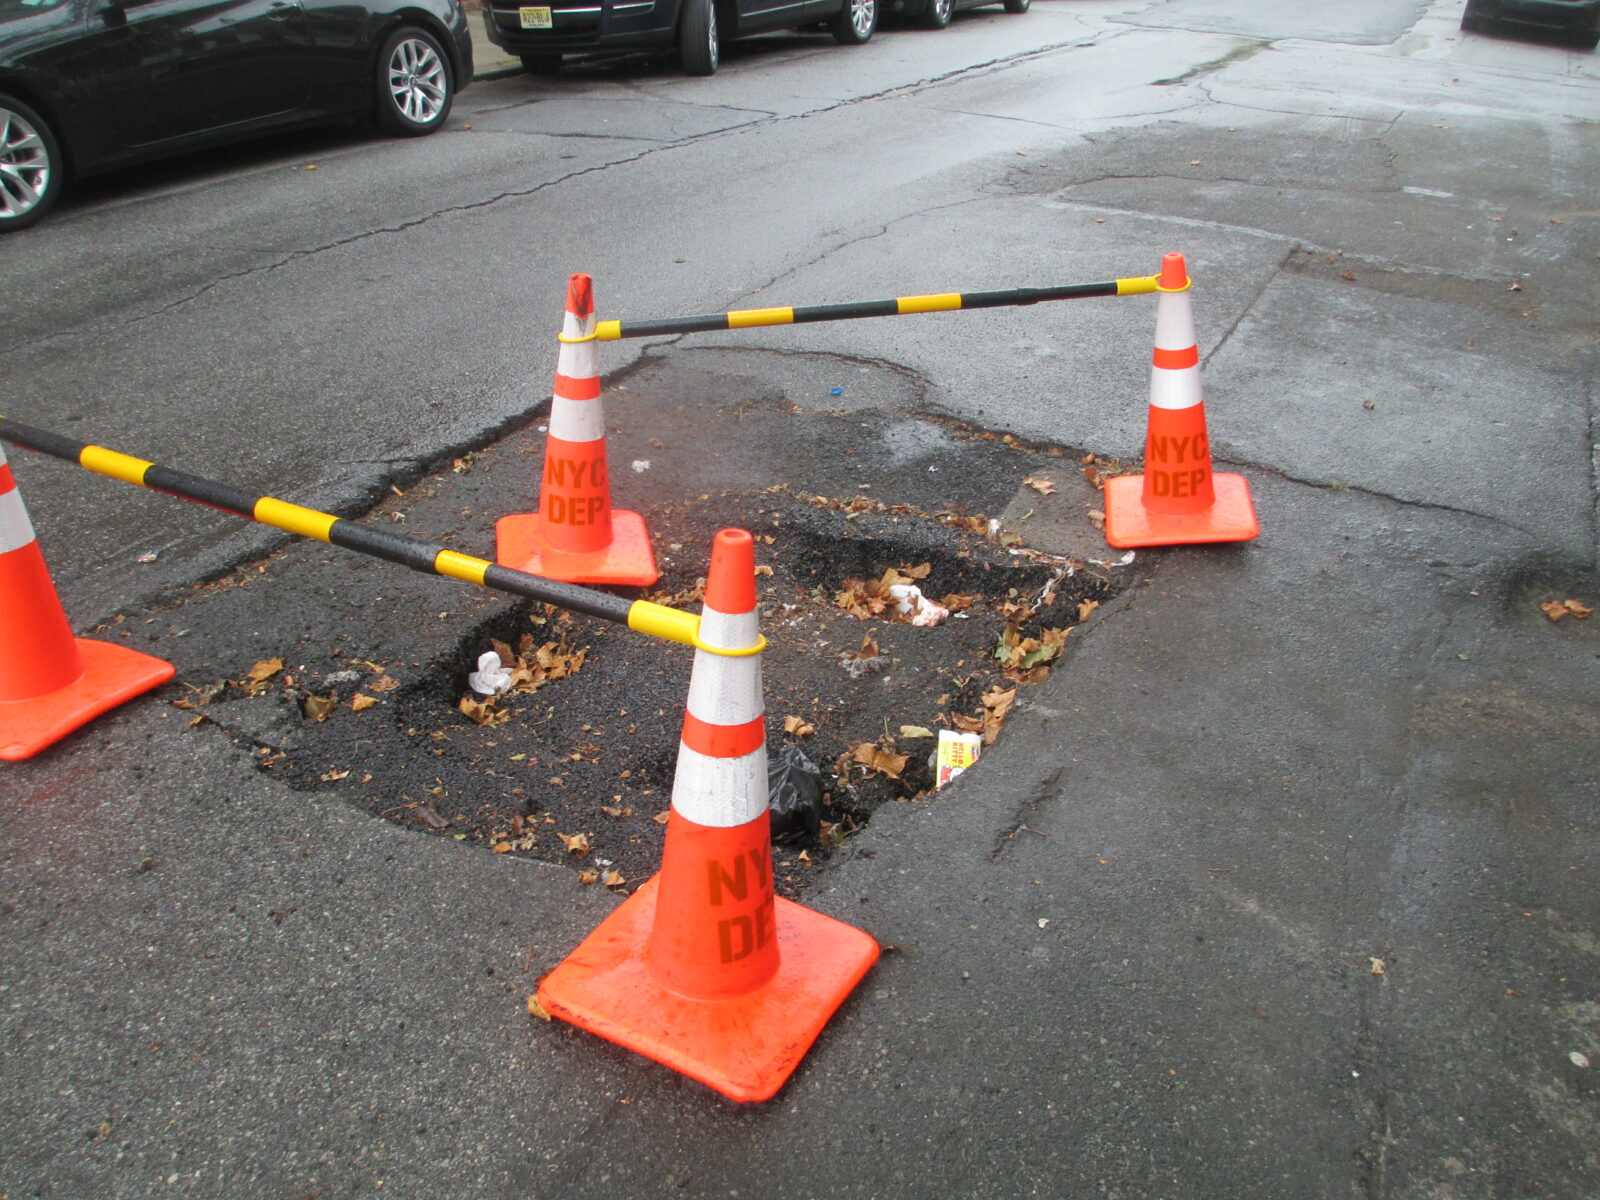 Sinkhole caused by a broken water main